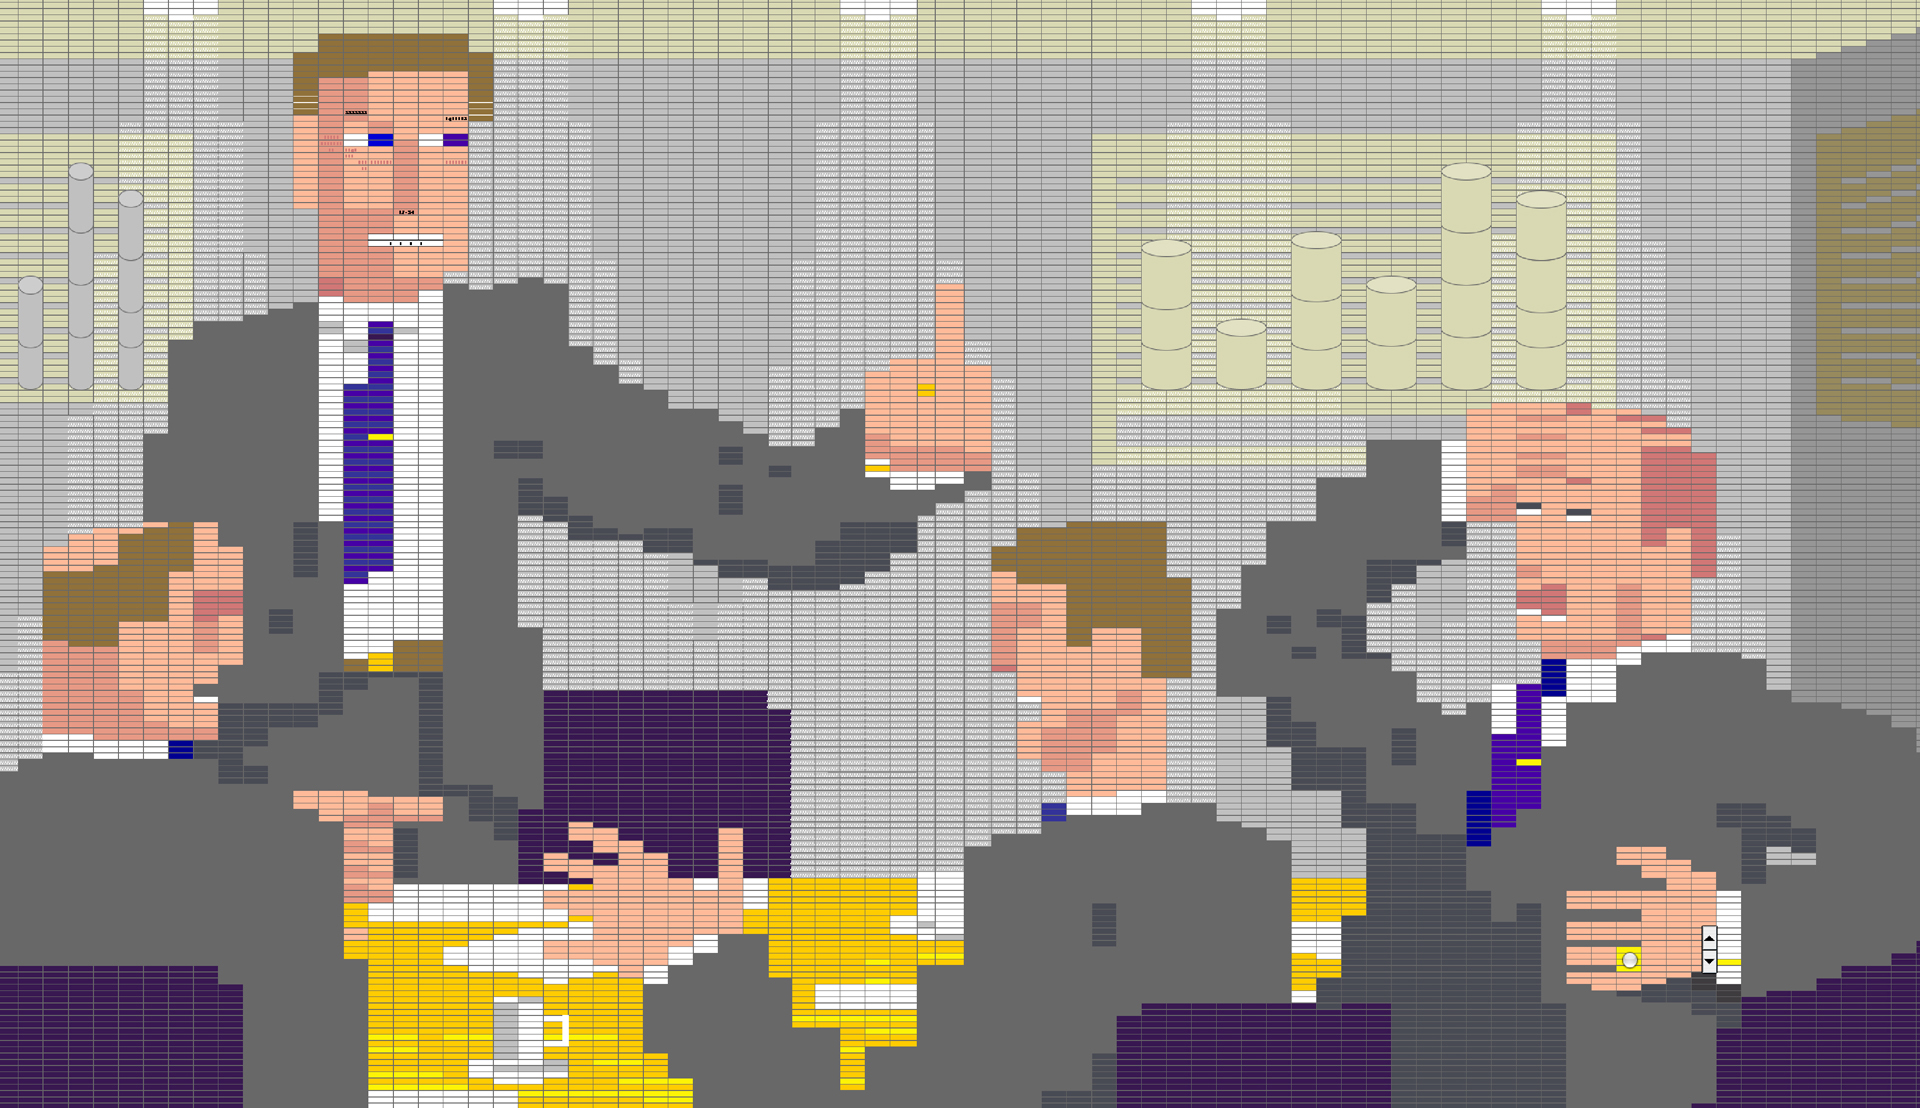 clipart in excel 2010 - photo #30